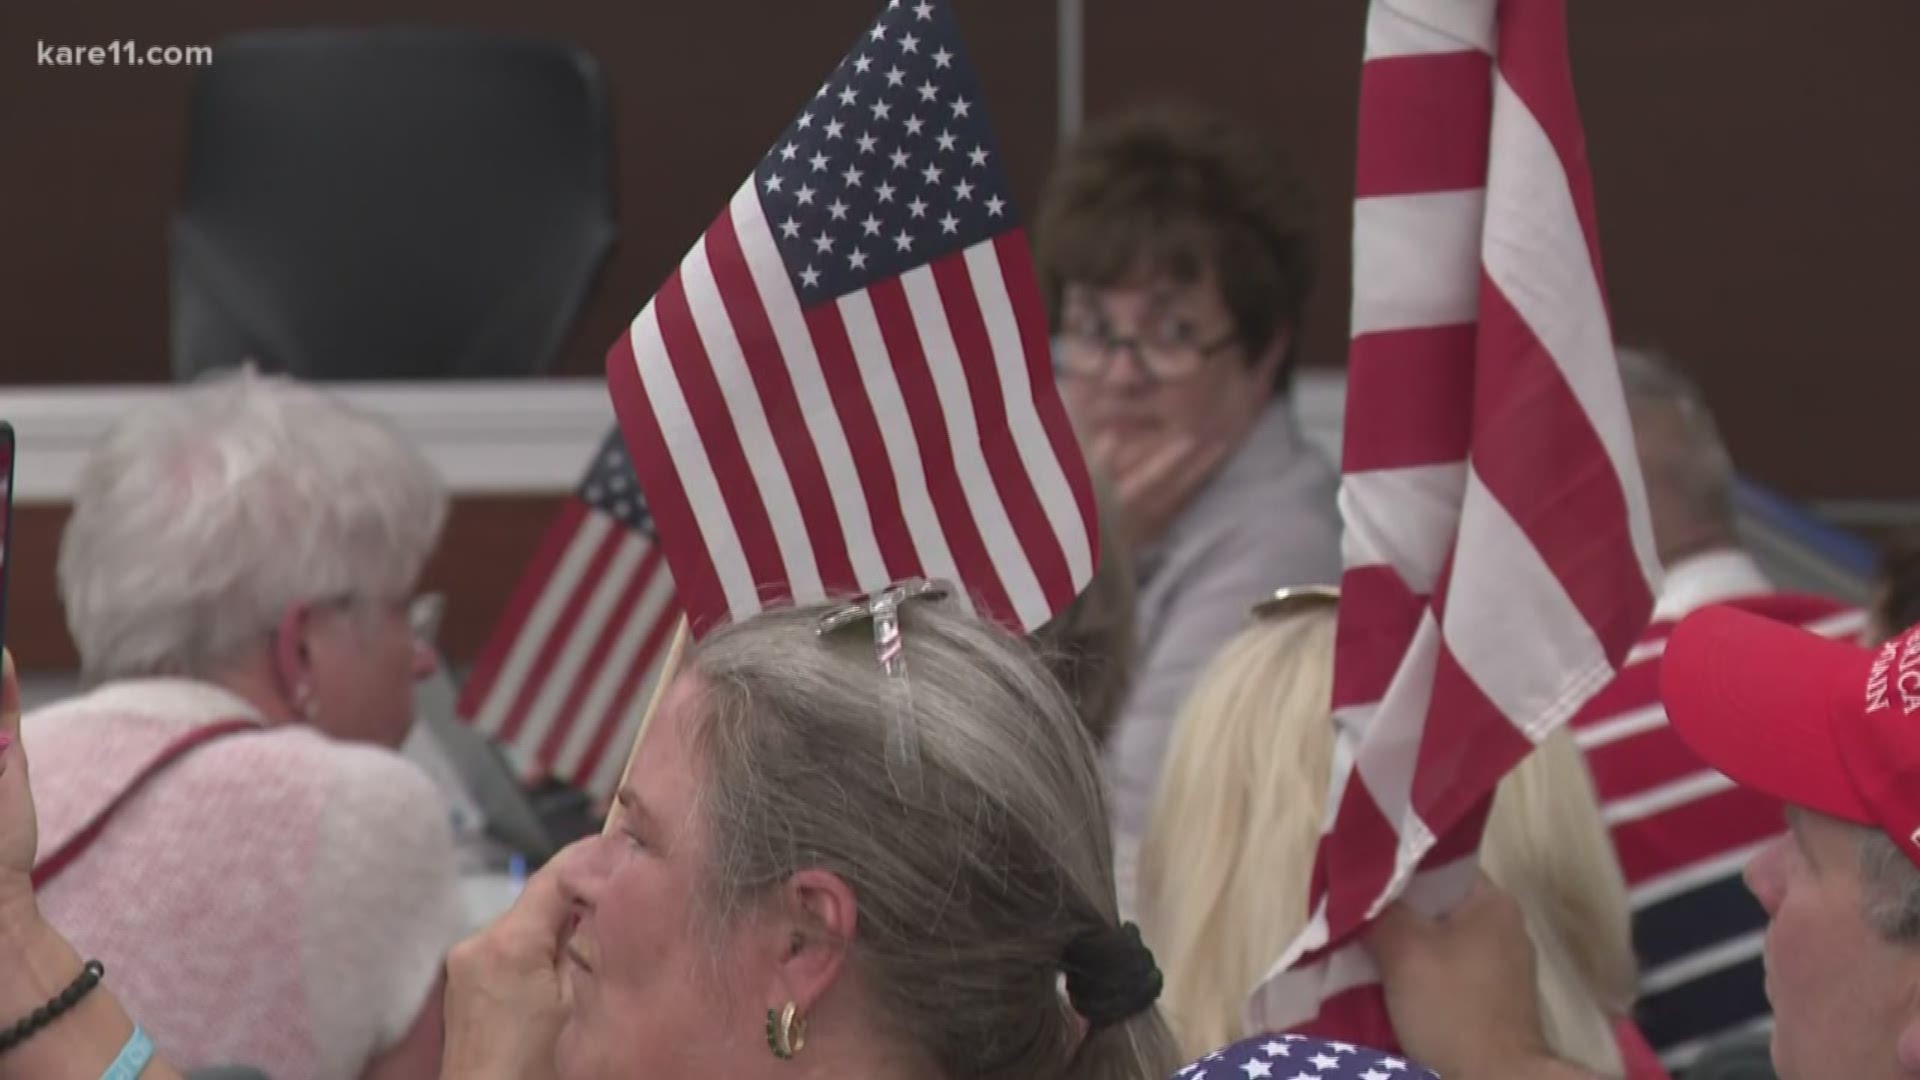 A study session held in St. Louis Park City Council chambers on Monday exploded into confrontation, as protesters took aim at council members for voting last month to remove the Pledge of Allegiance from the start of council meetings.